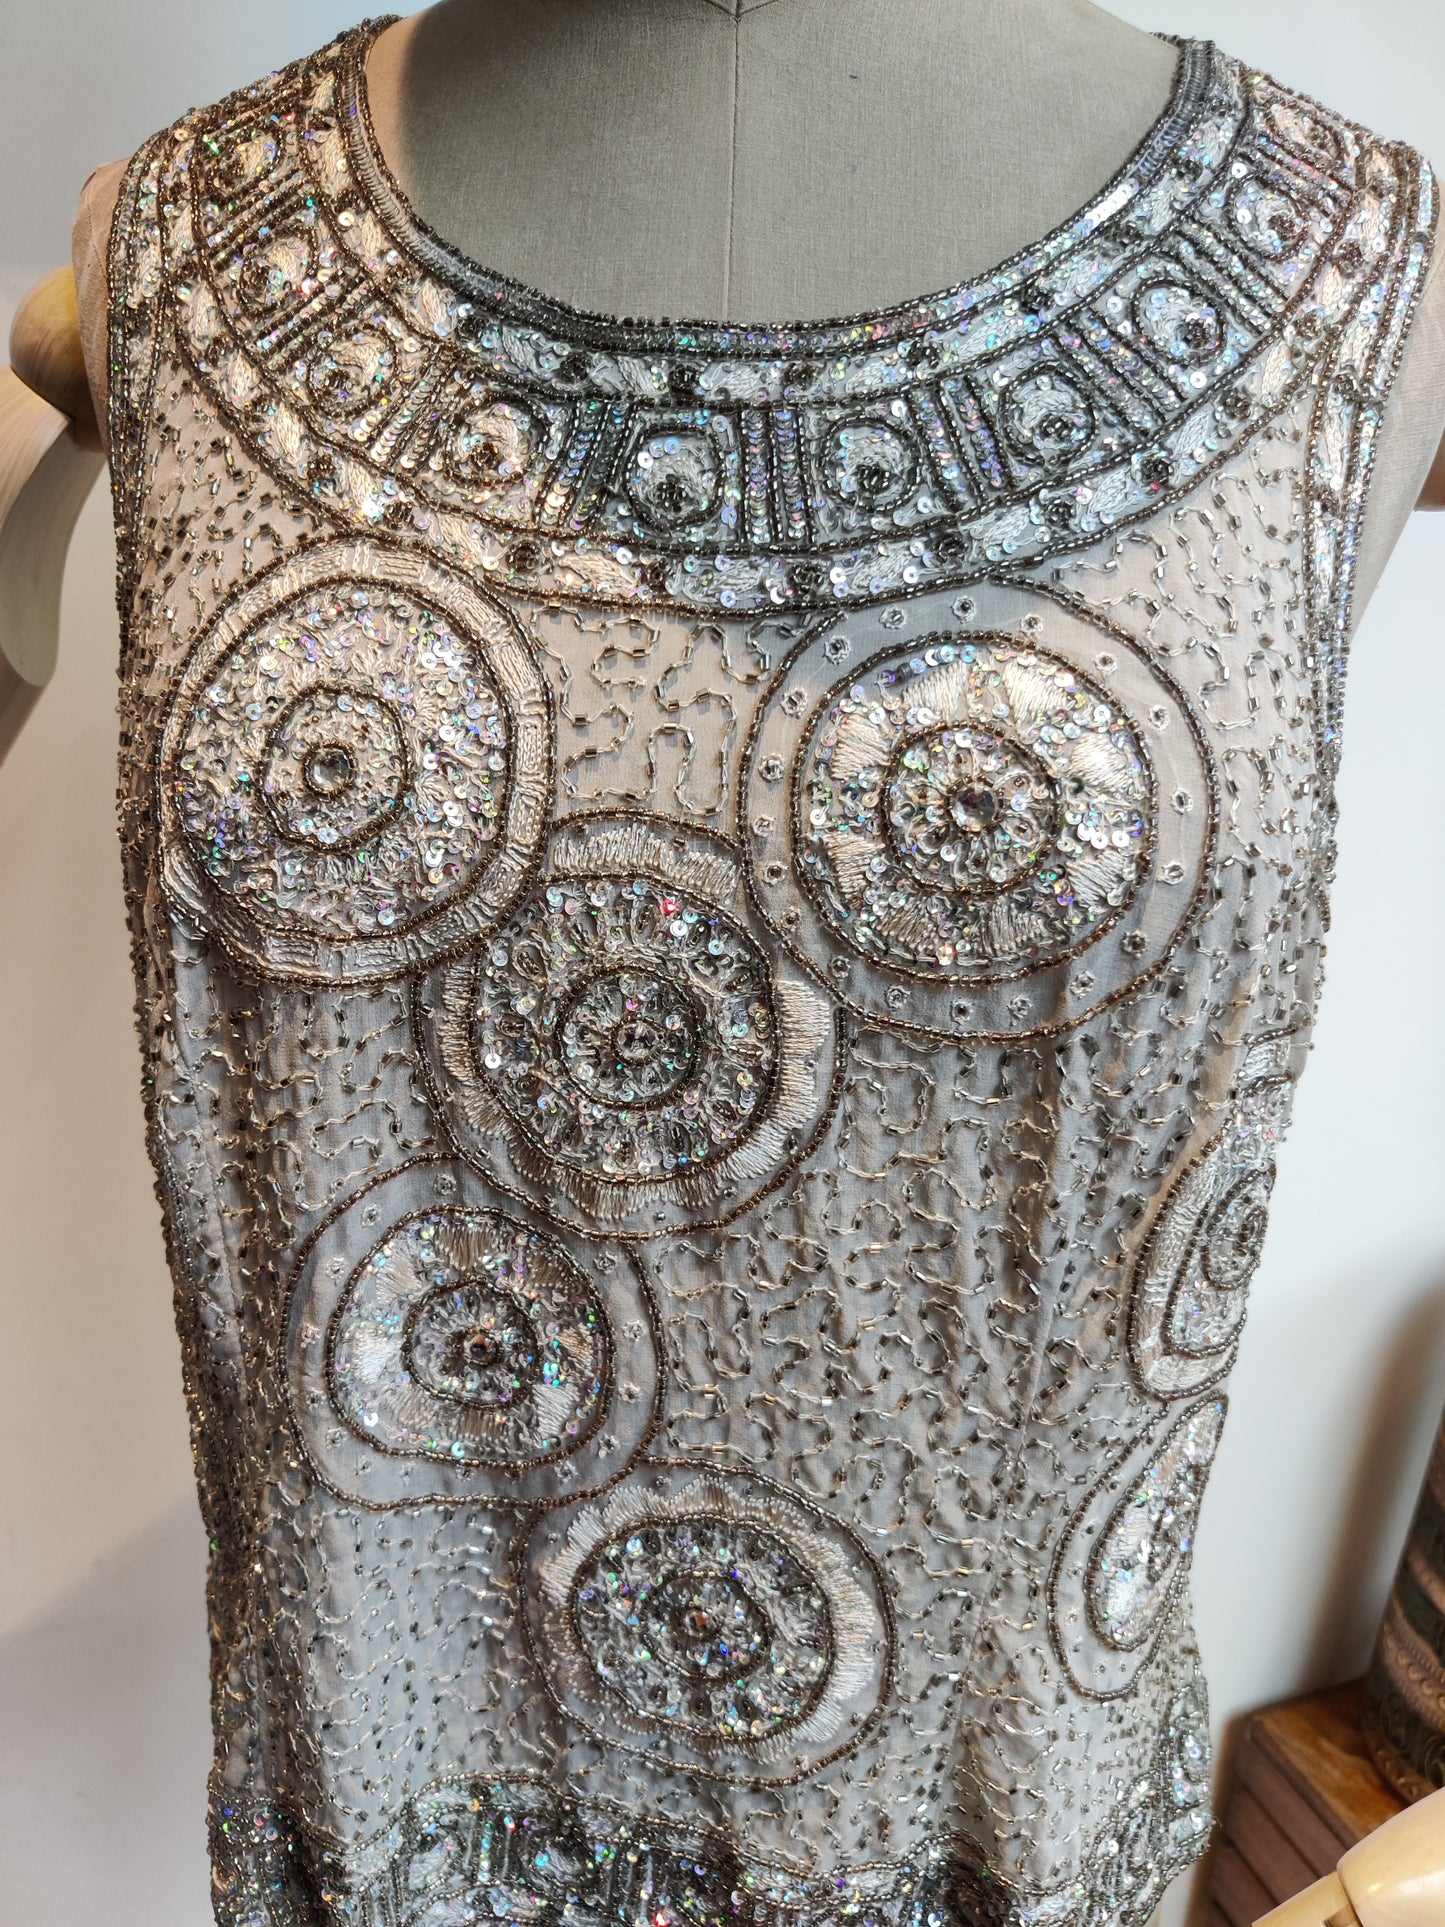 Silver 30s style beaded top